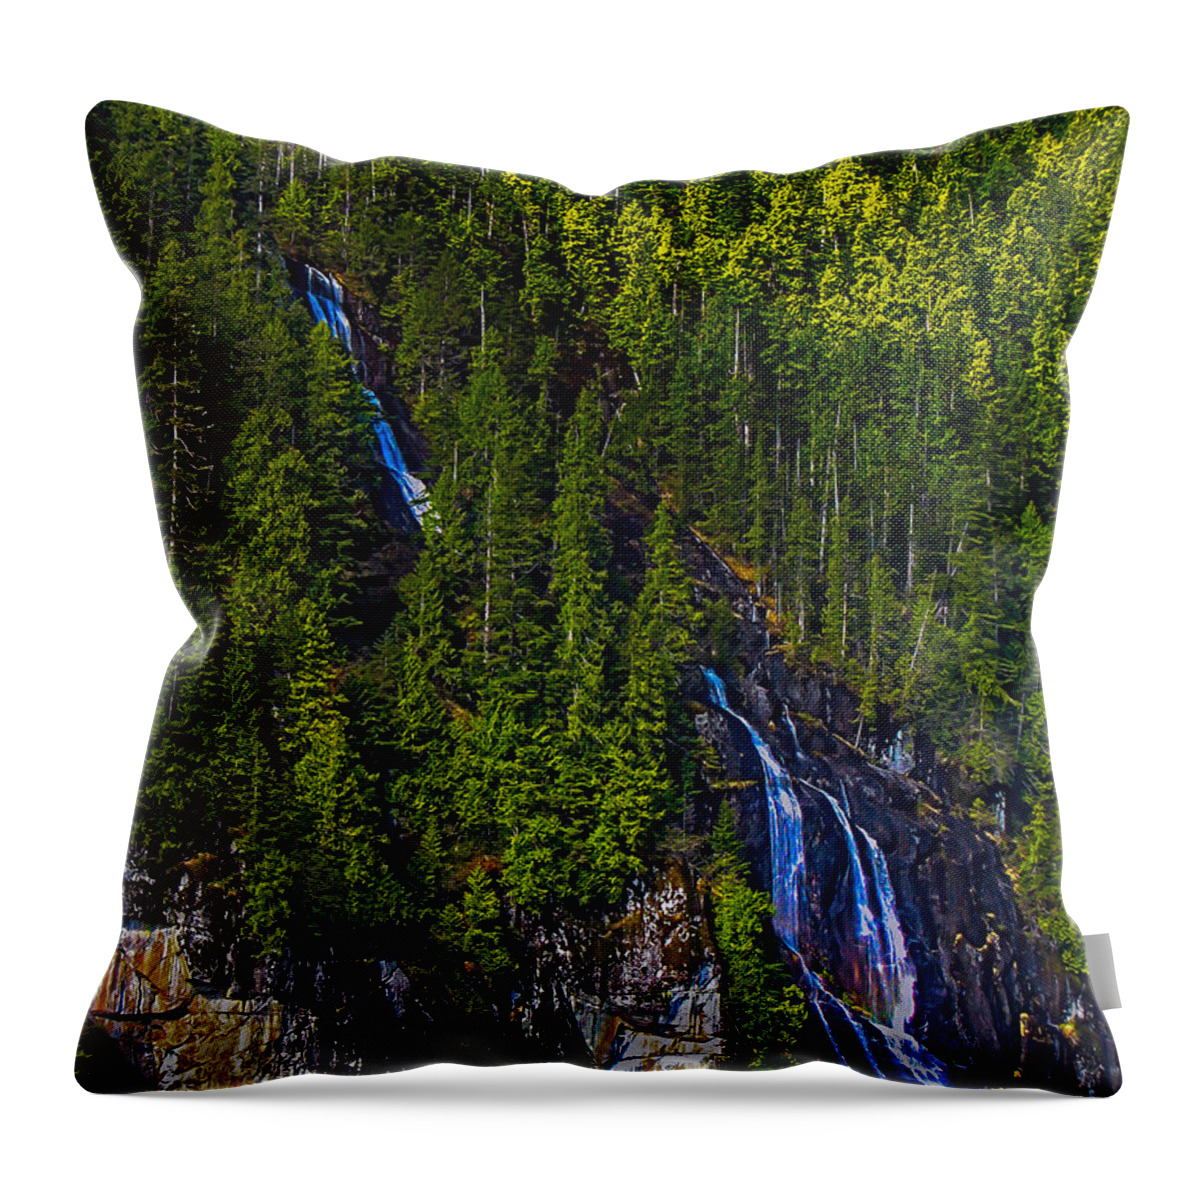 Waterfall Throw Pillow featuring the photograph Coastal Waterfall by Robert Bales